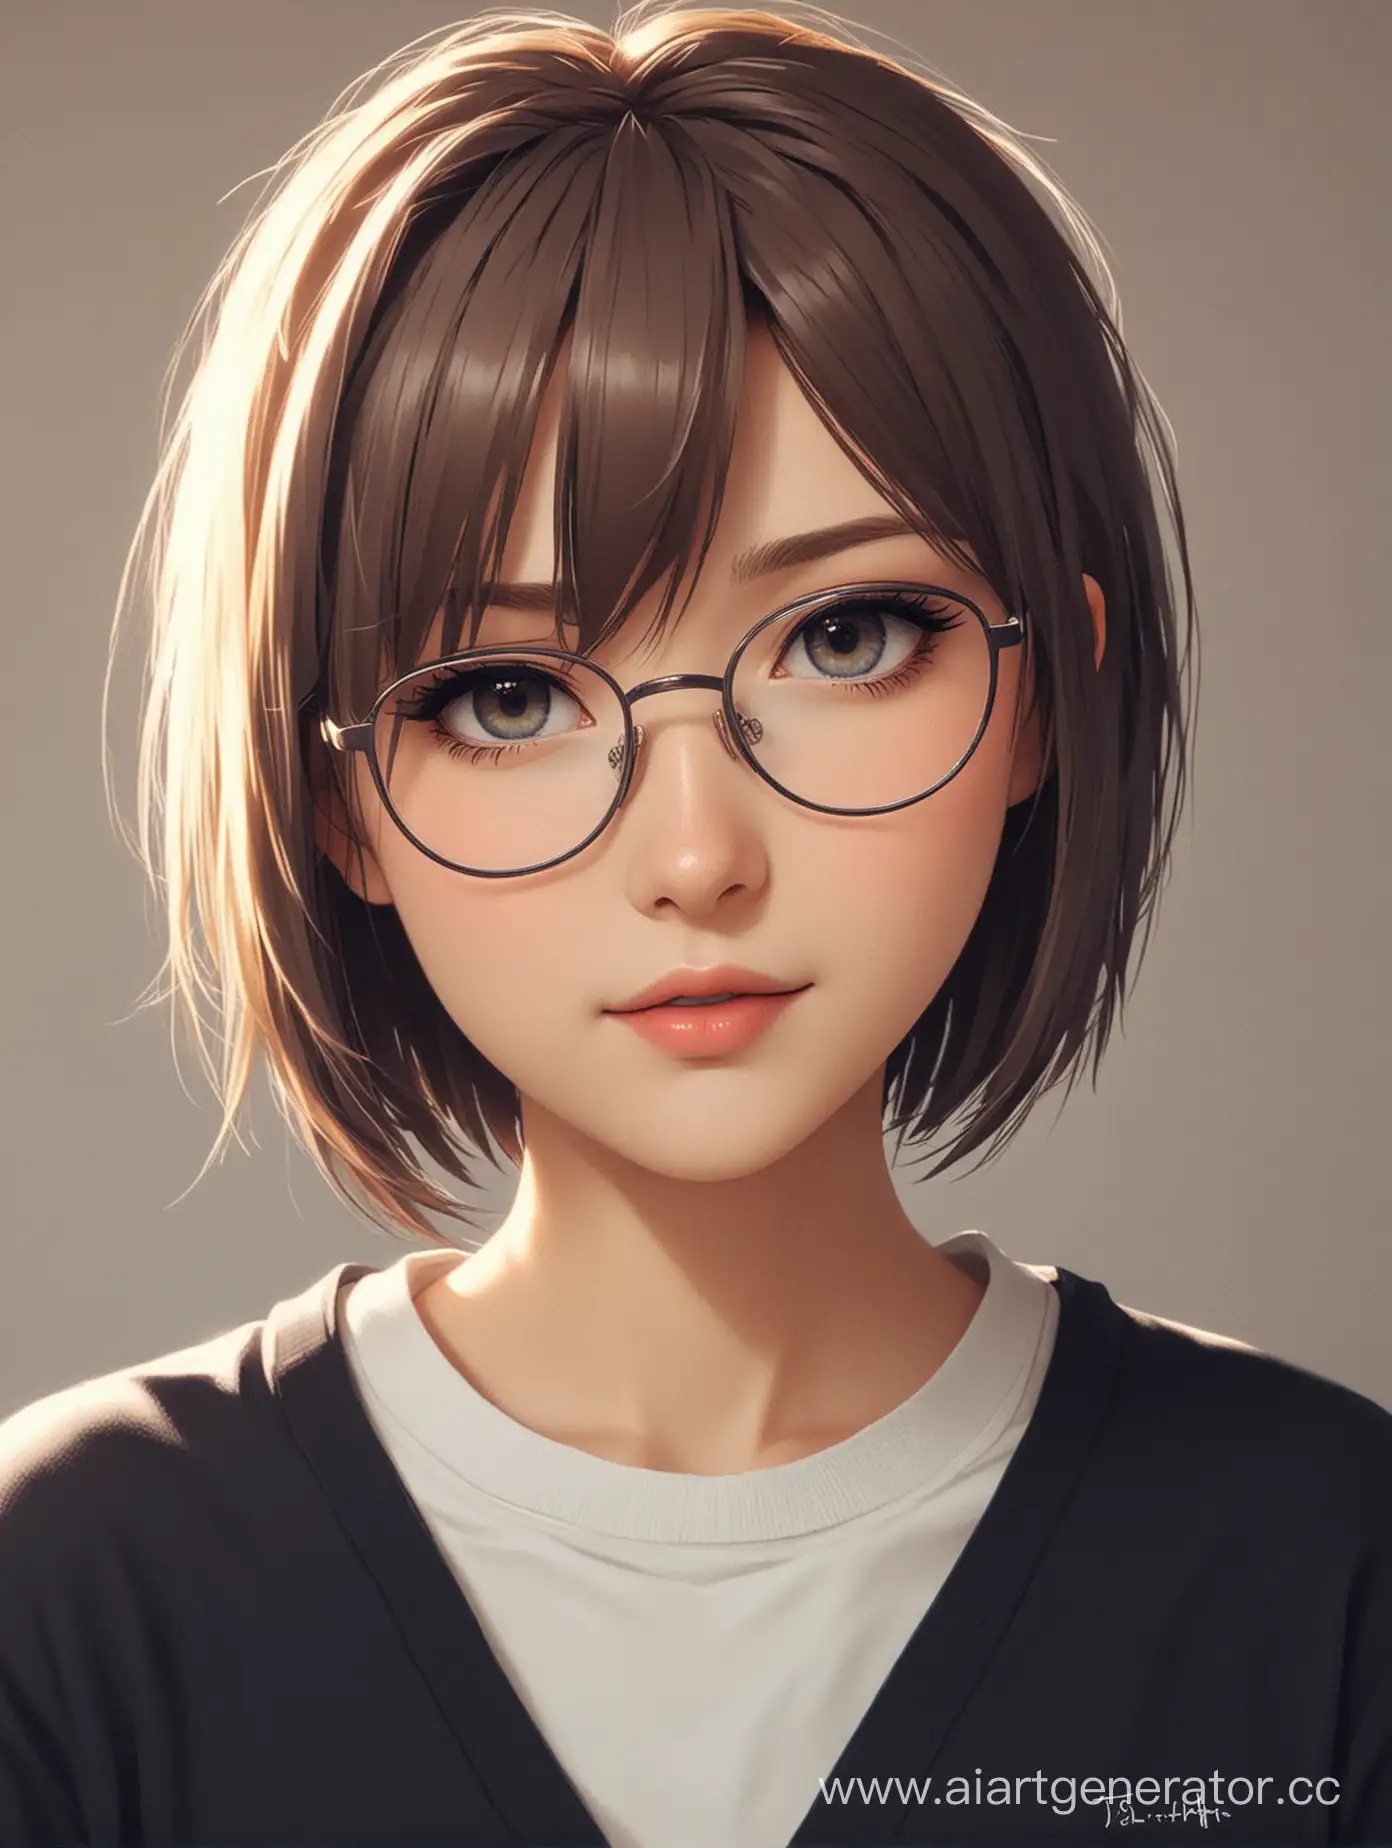 Anime-Girl-with-Glasses-and-Short-Hair-in-a-Modern-Style